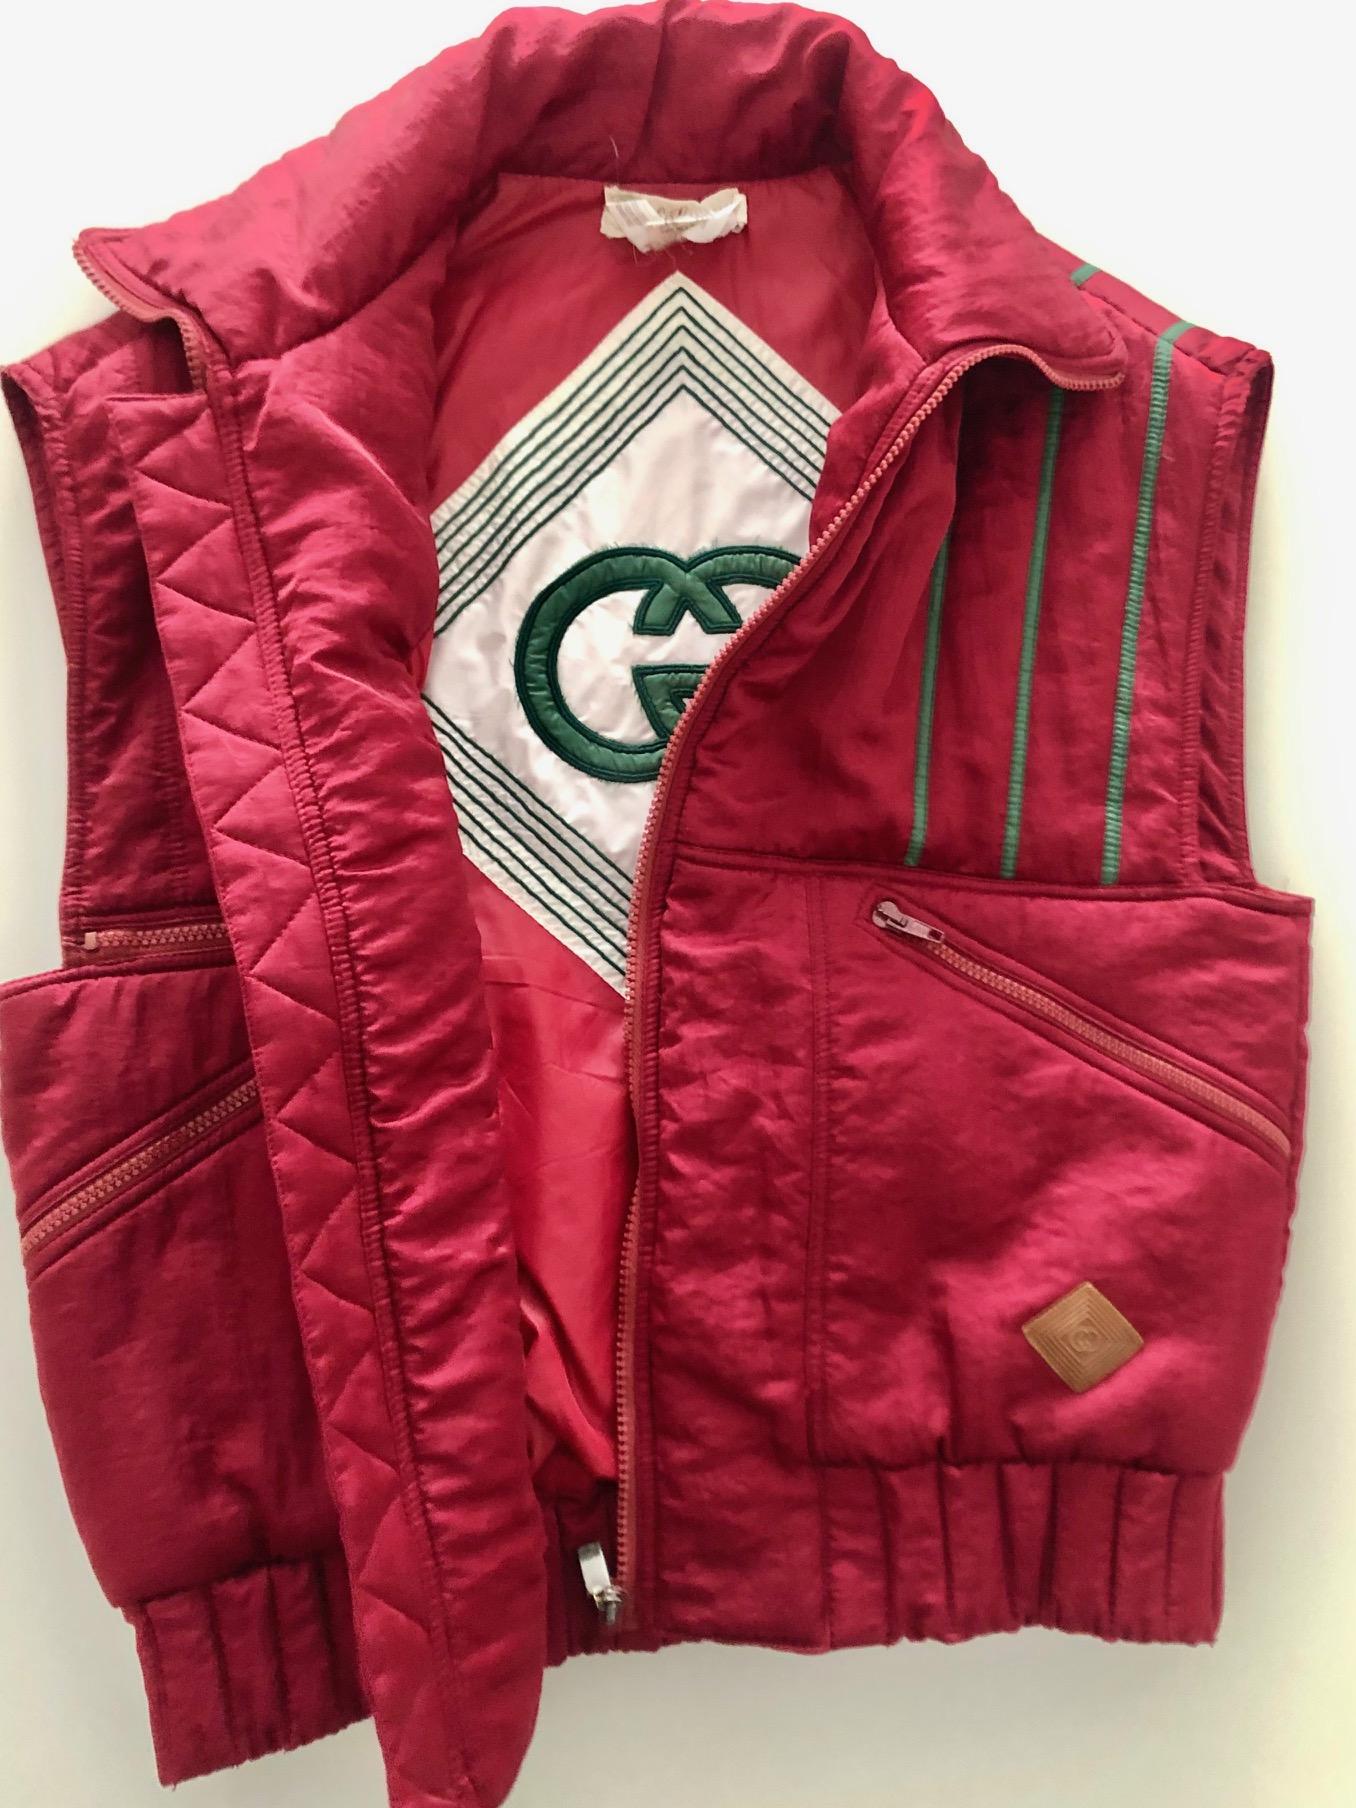 Vintage 1980's Gucci Fall/Winter puffer vest jacket t in pink, green frontal stripe details, 3 frontal zipped pockets, high collar, front zip, inside Gucci green logo on white background, logo printed on leather, 100% polyester, Made in